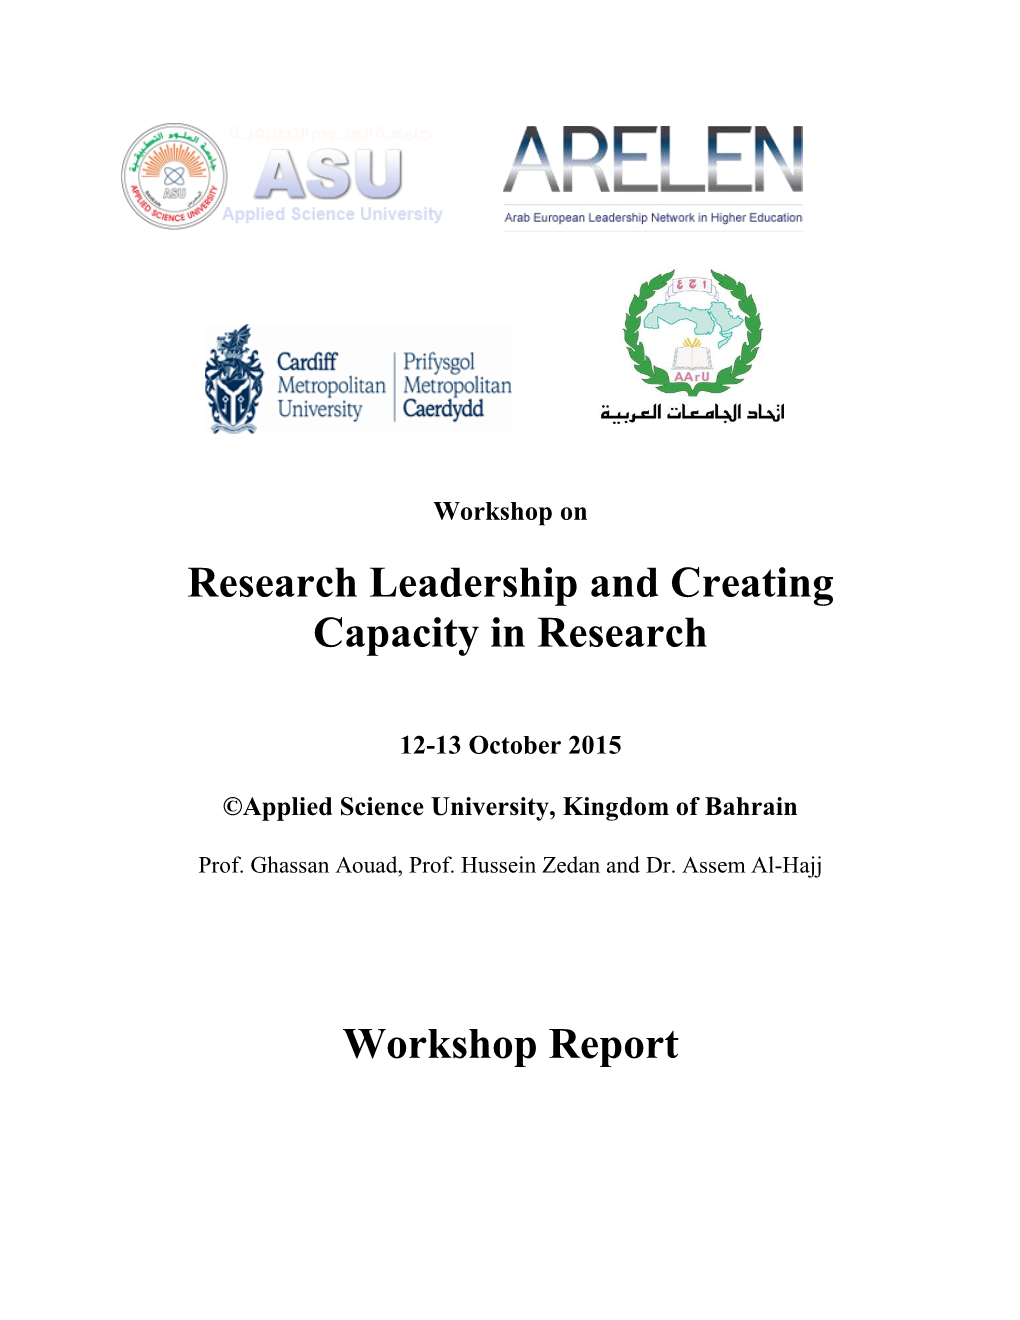 Research Leadership and Creating Capacity in Research Workshop